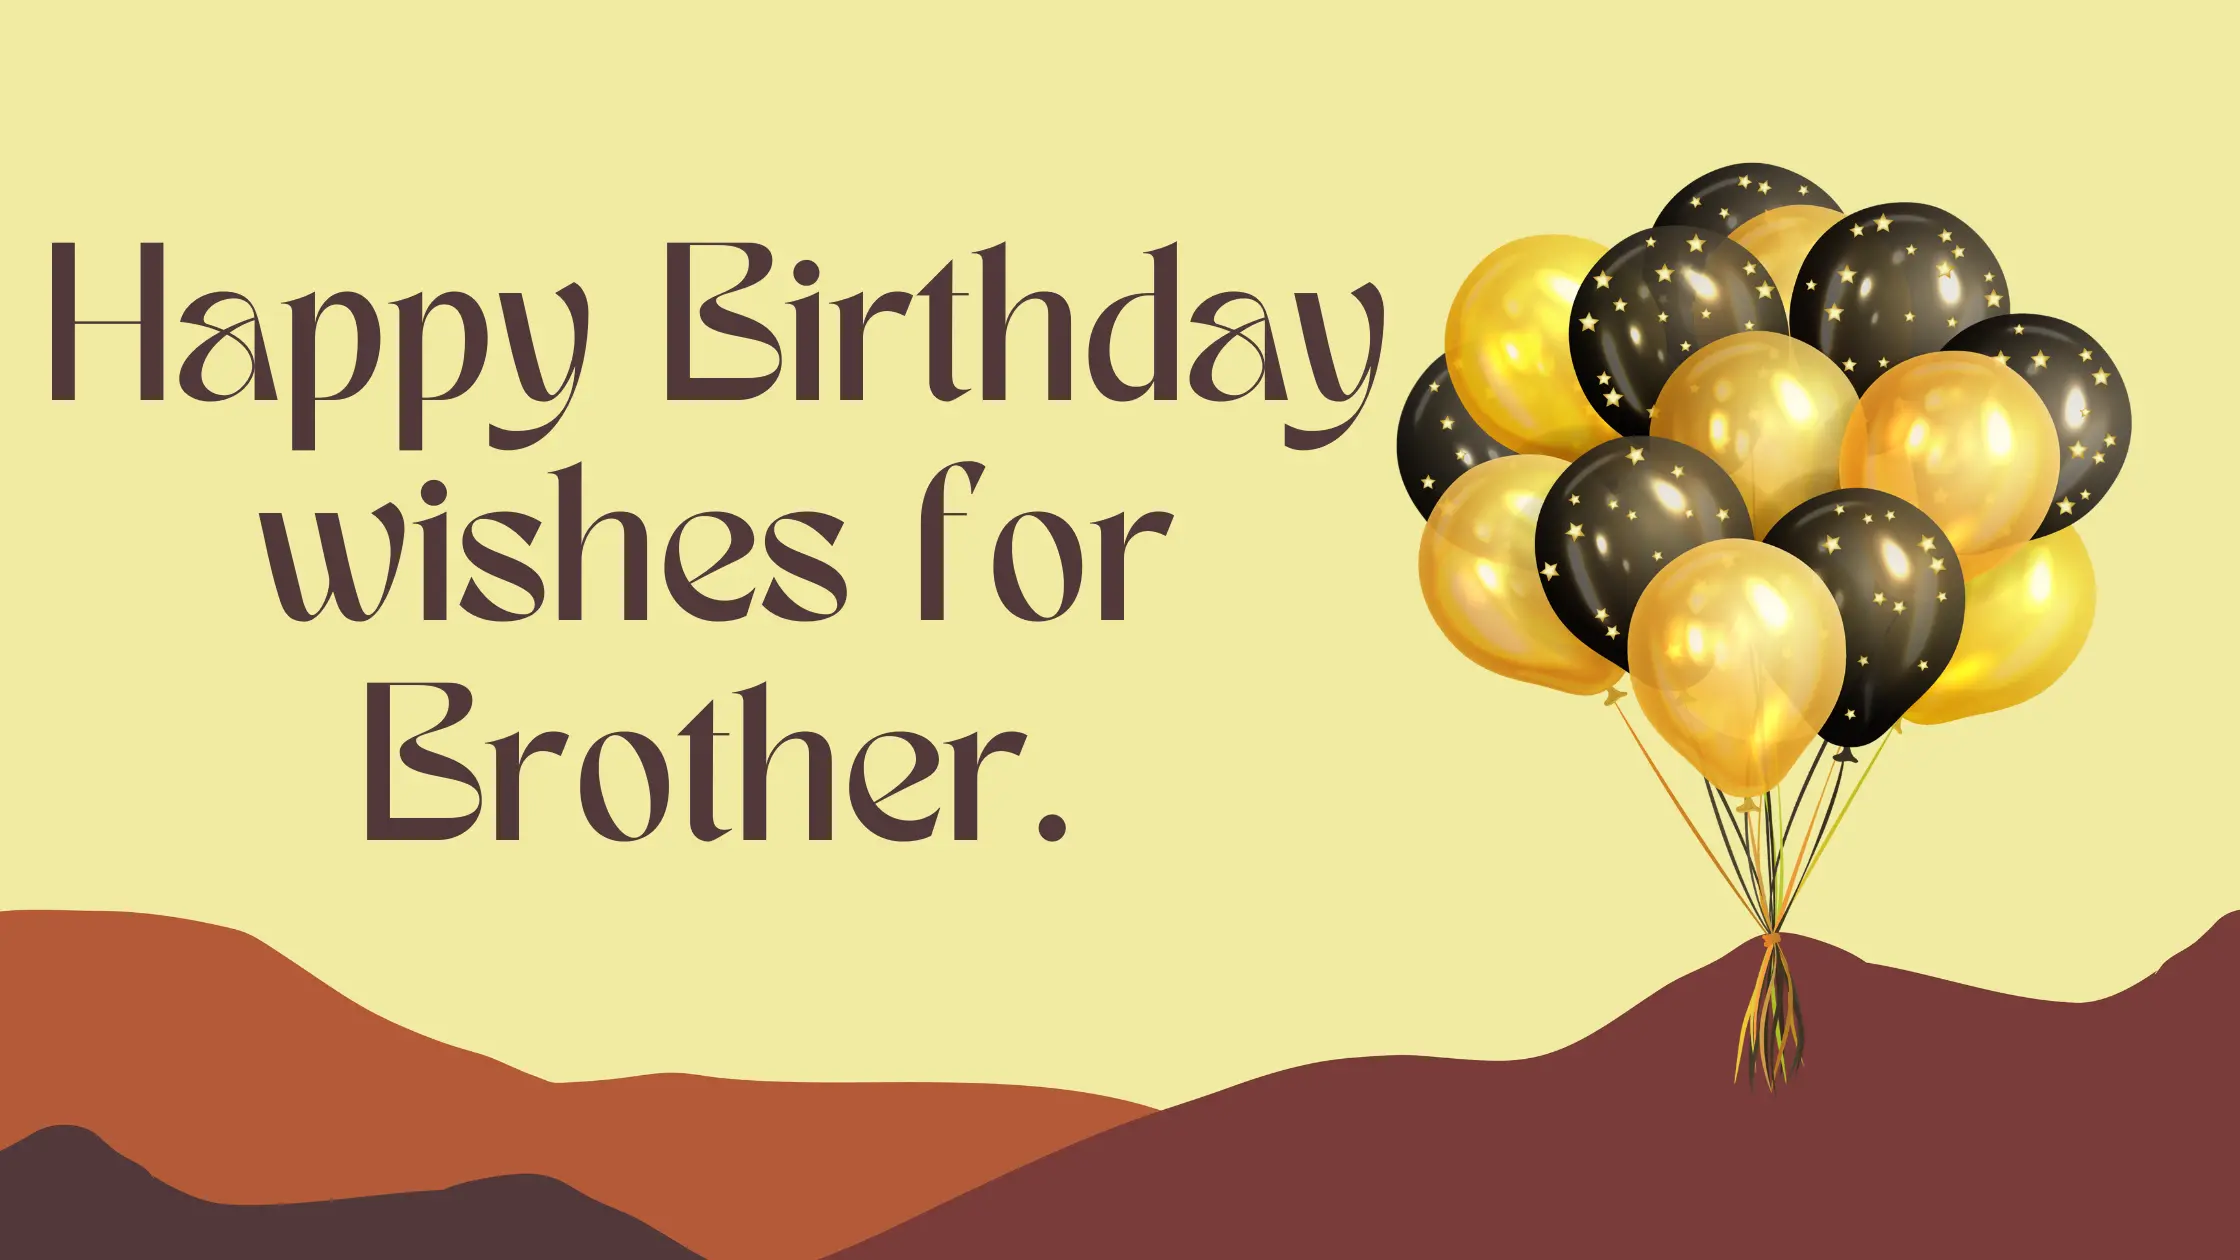 unique heart-touching birthday wishes for brother.